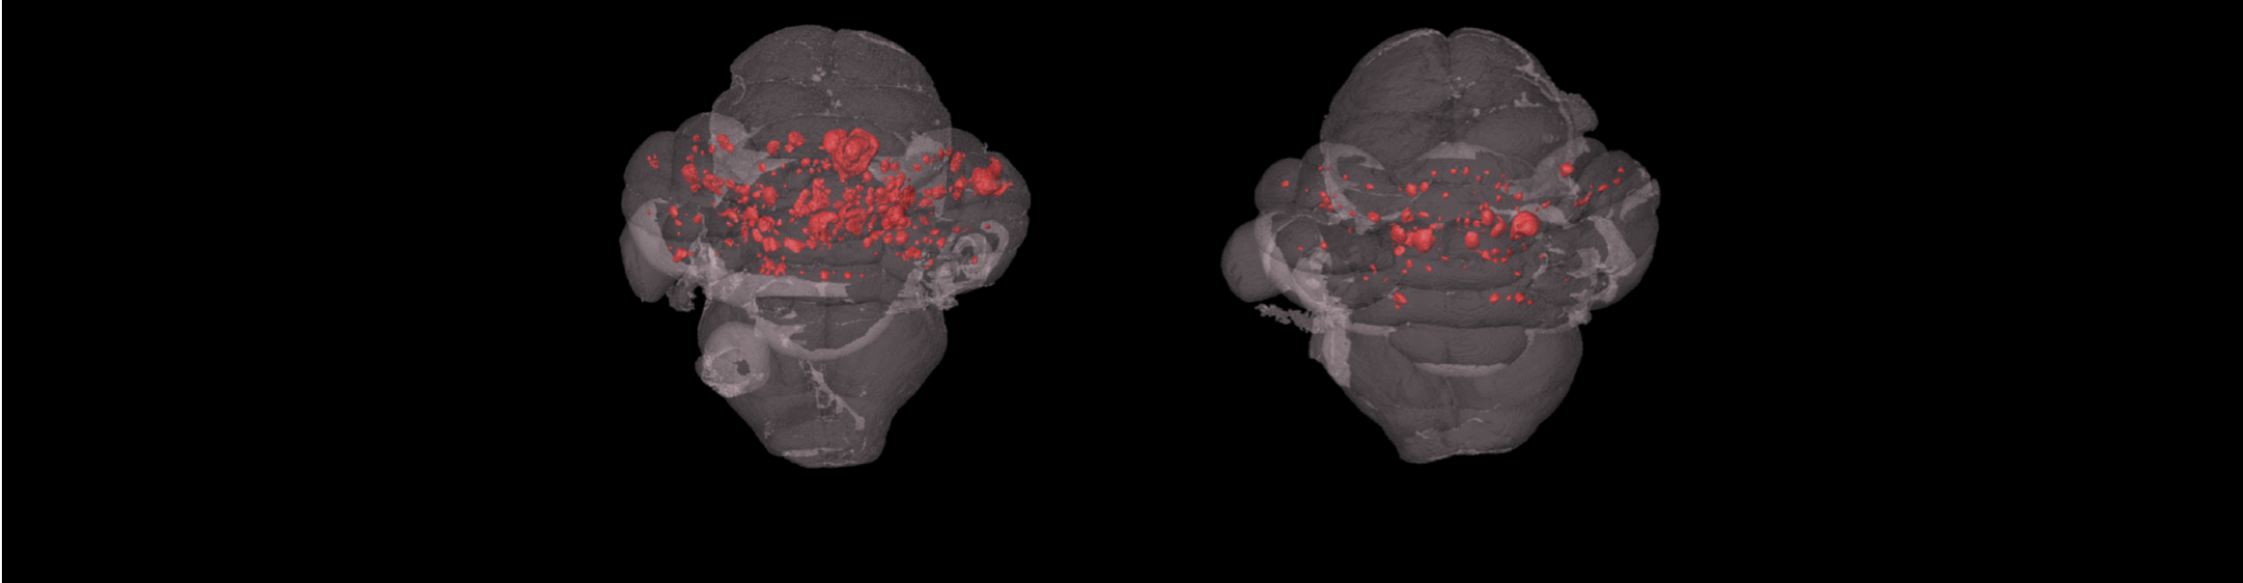 MicroCT rendering of CCM lesions from Hong et al. 2020, Journal of Experimental Medicine.